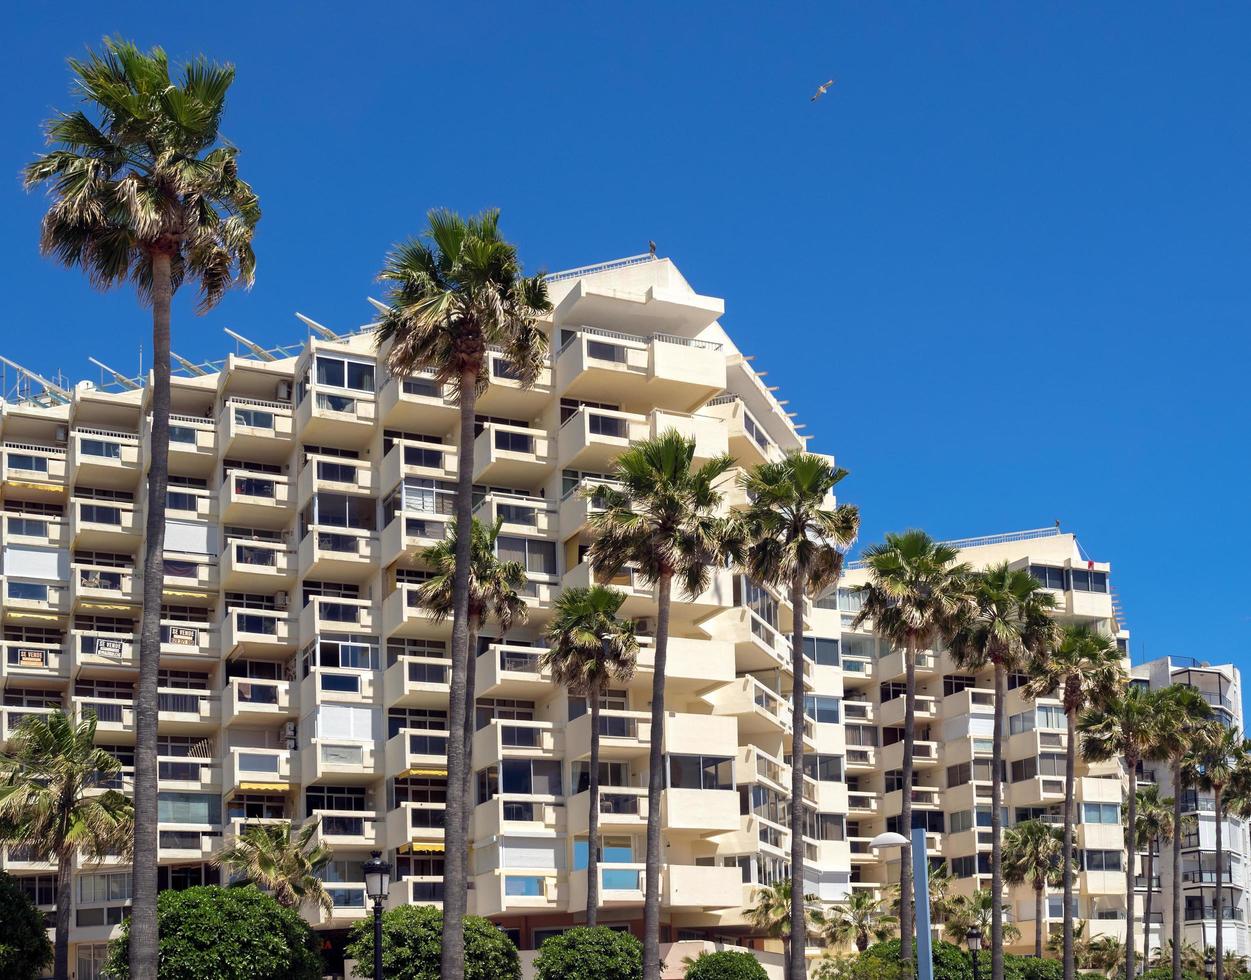 MARBELLA, ANDALUCIA, SPAIN, 2014. View of an apartment block in Marbella Spain on May 4, 2014 photo